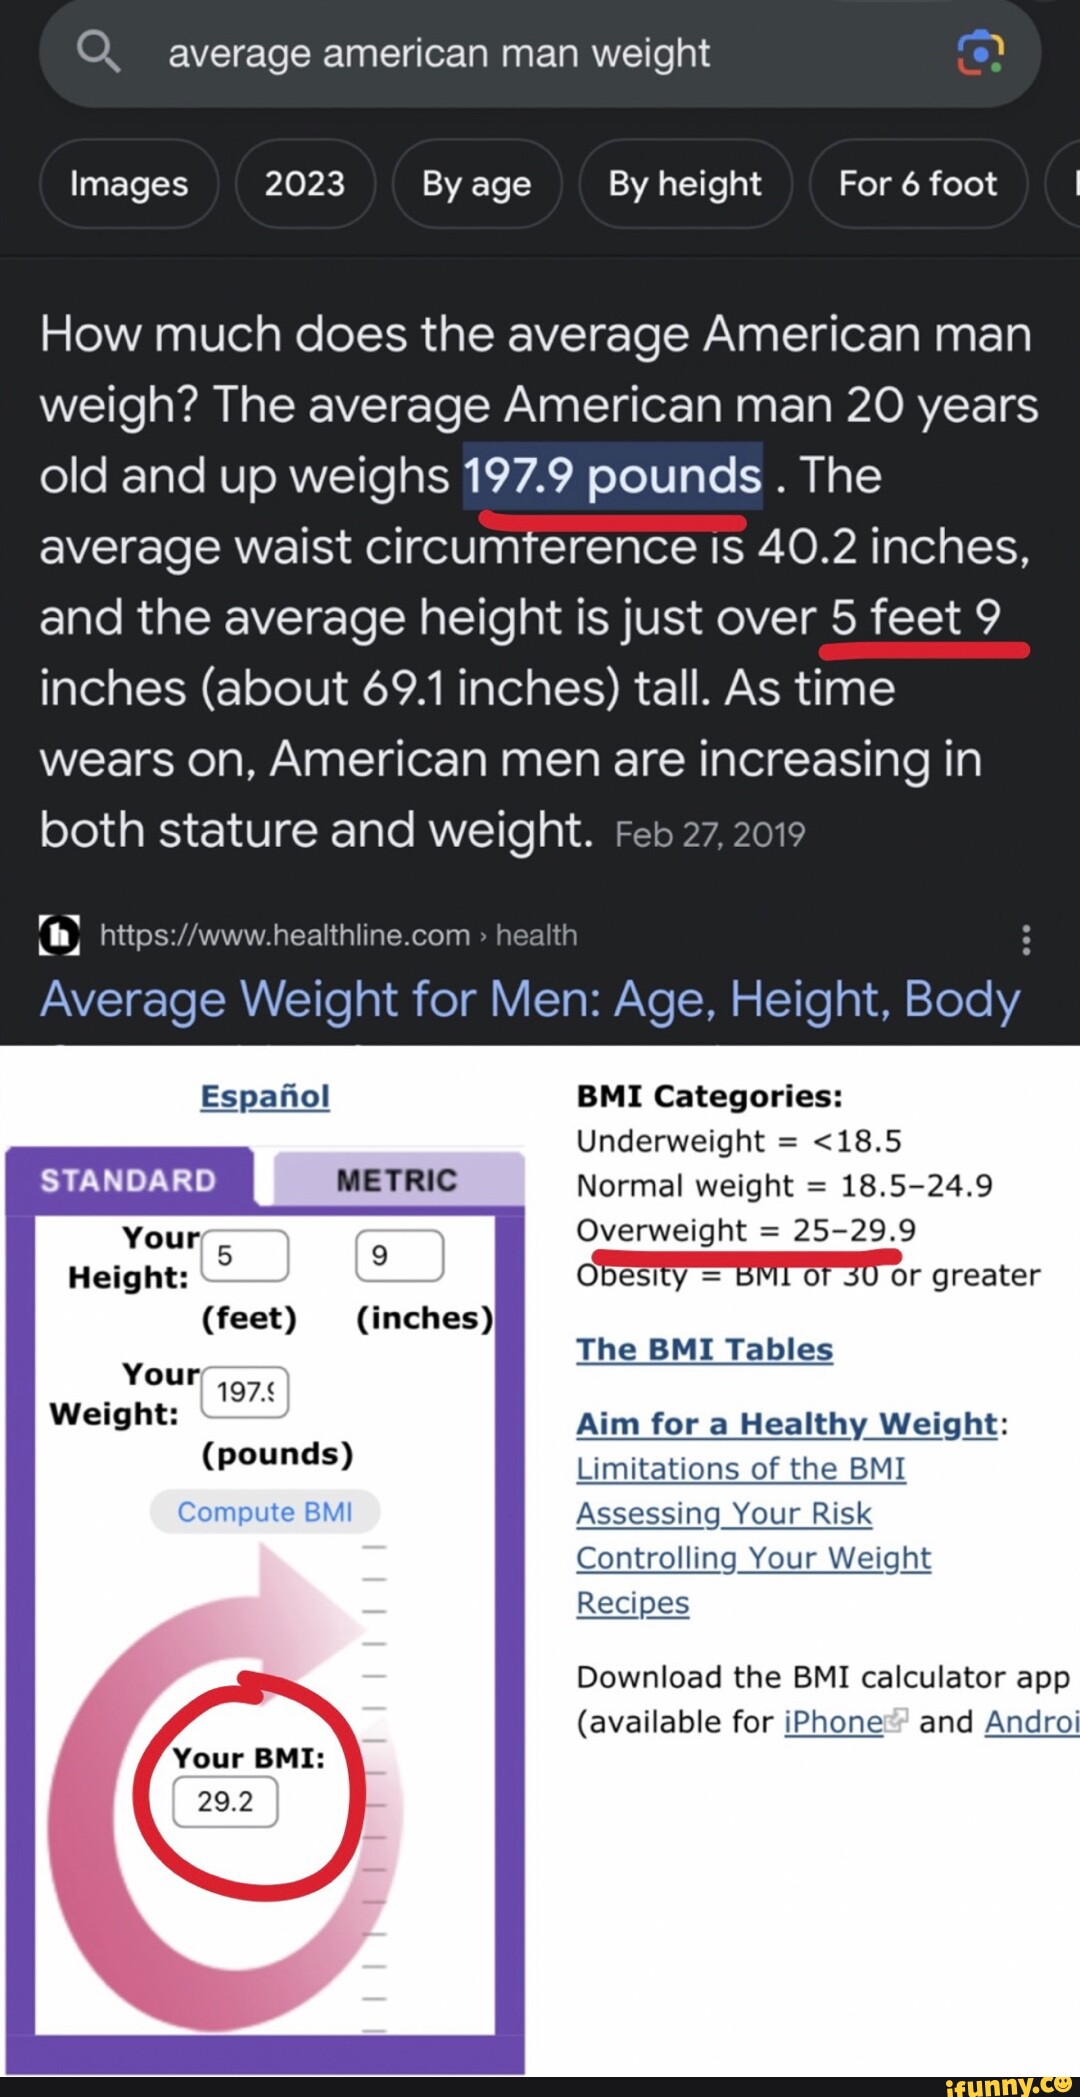 What is the average weight for men?